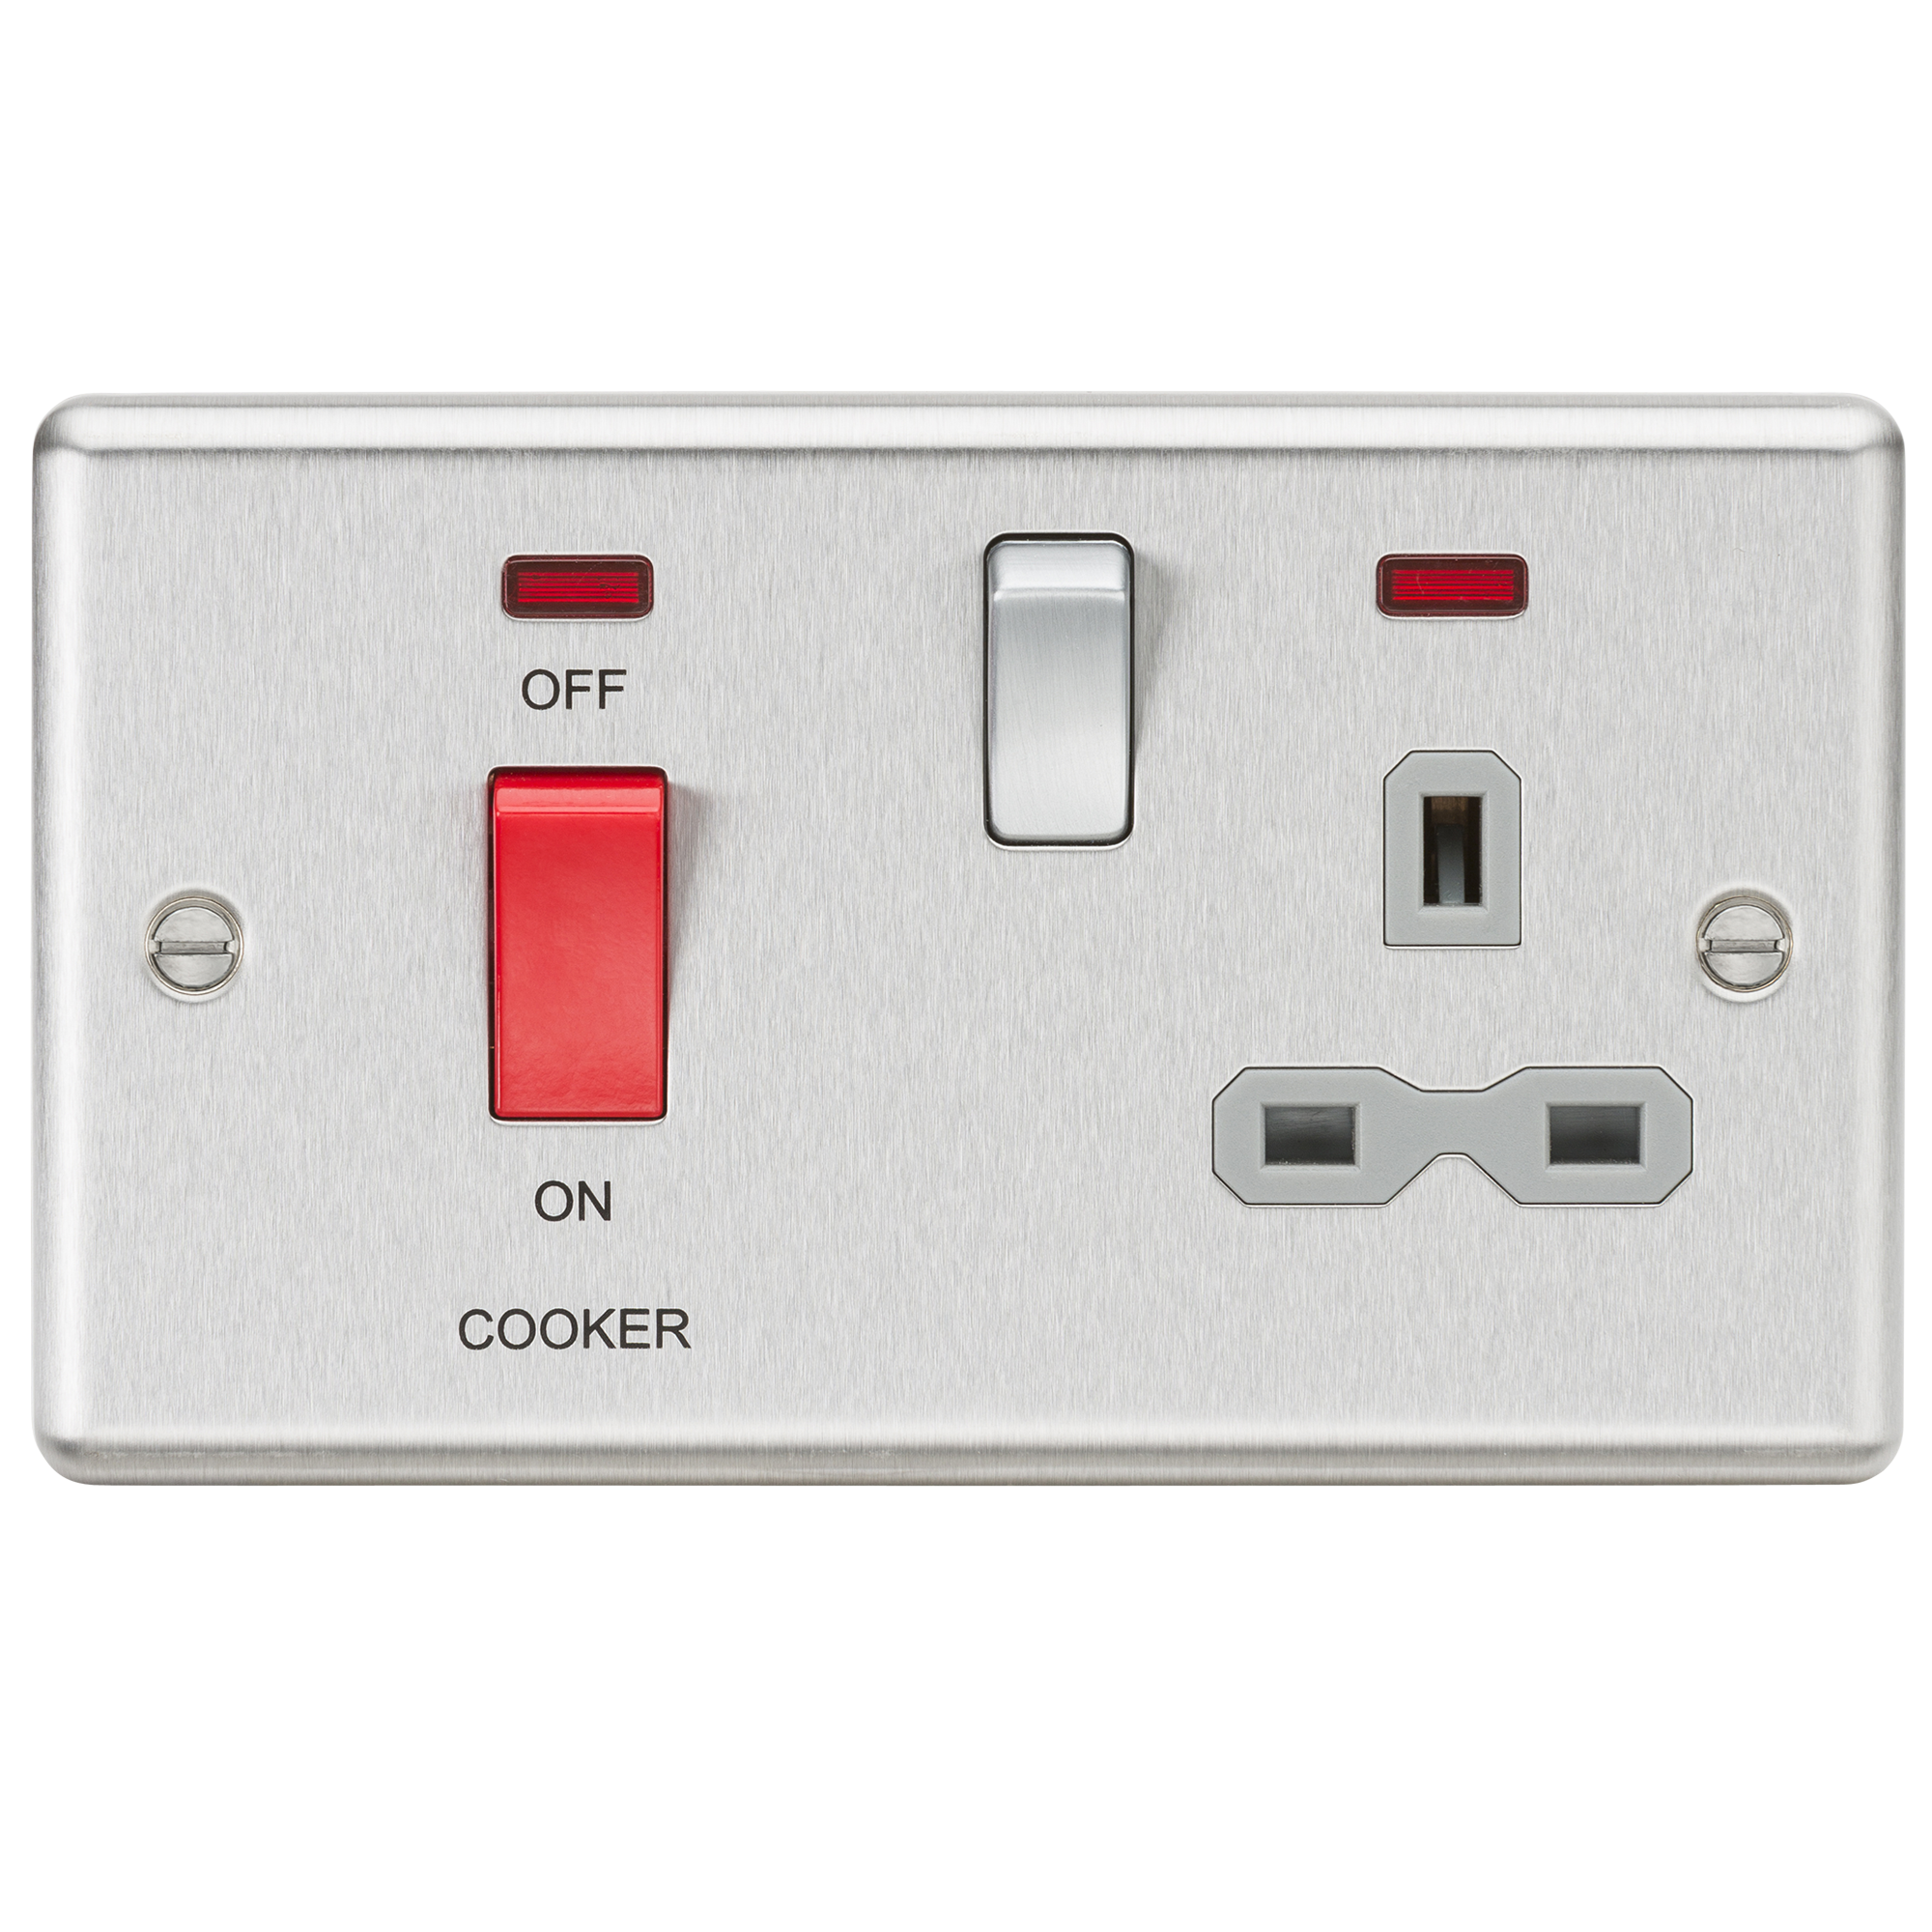 45A DP Cooker Switch 13A Switched Socket With Neons & Grey Insert - Rounded Edge Brushed Chrome - CL83BCG 